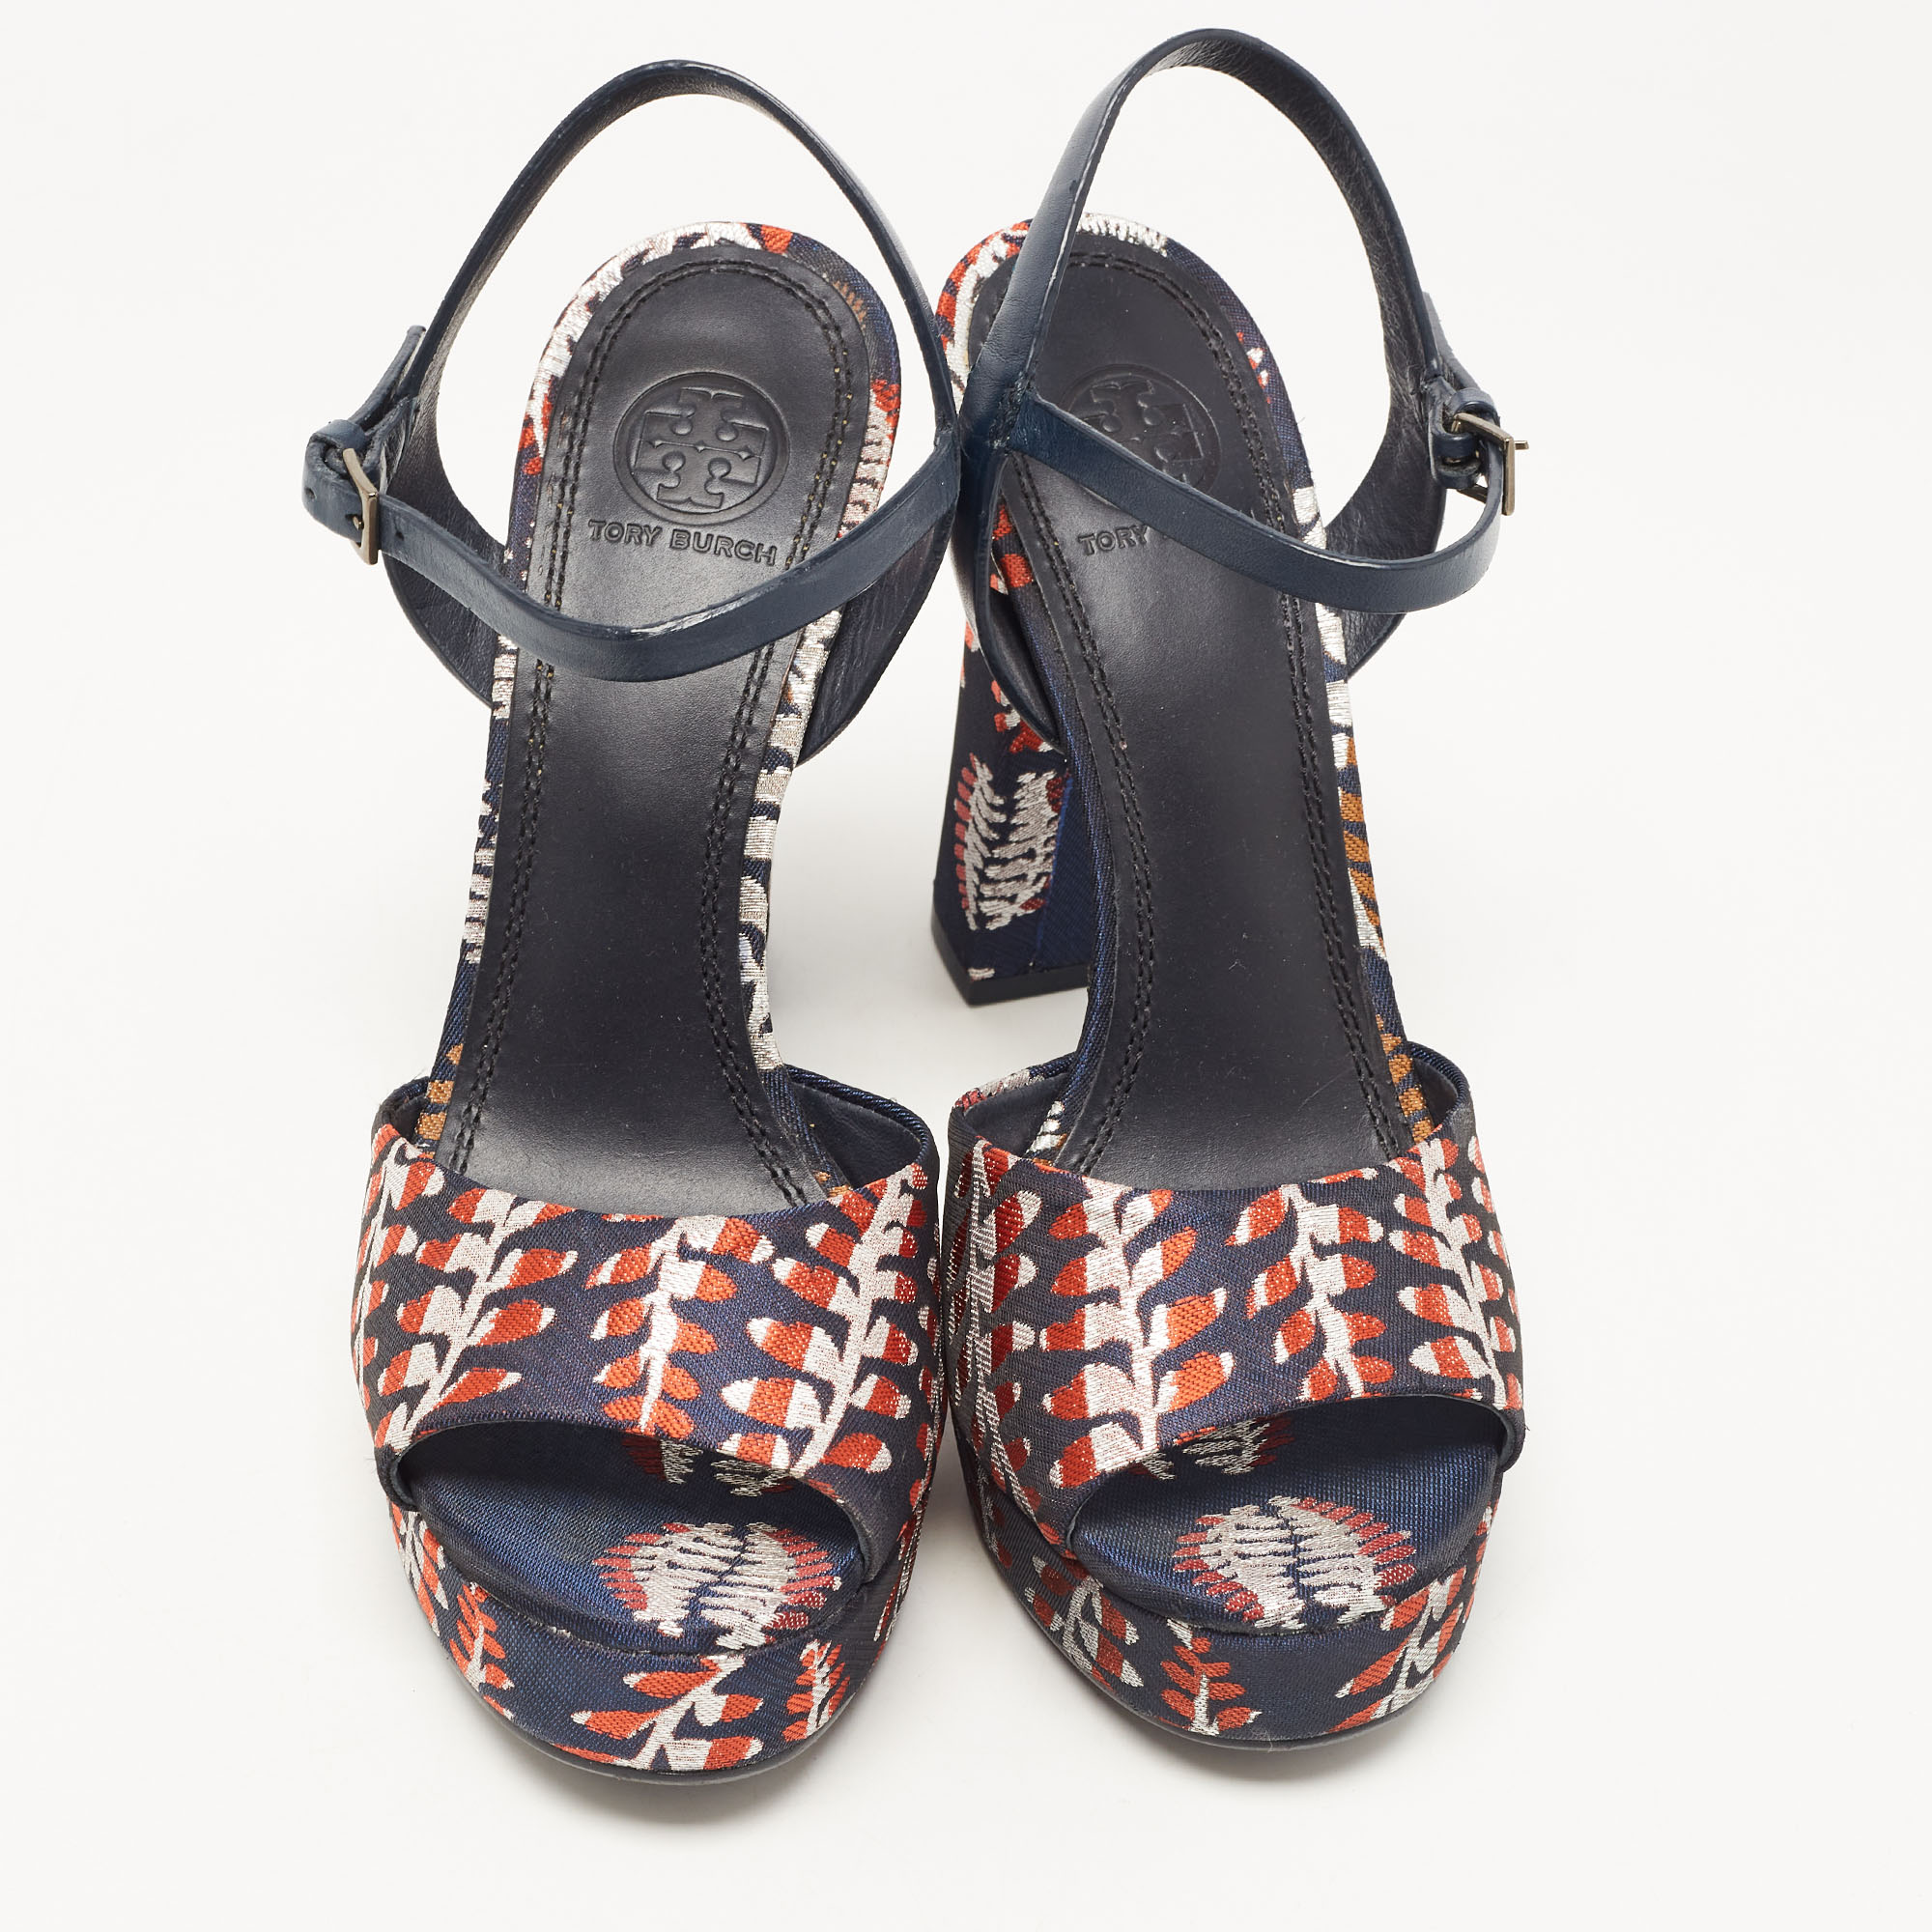 Tory Burch Navy Blue/Red Brocade Fabric Ankle Strap Sandals Size 38.5